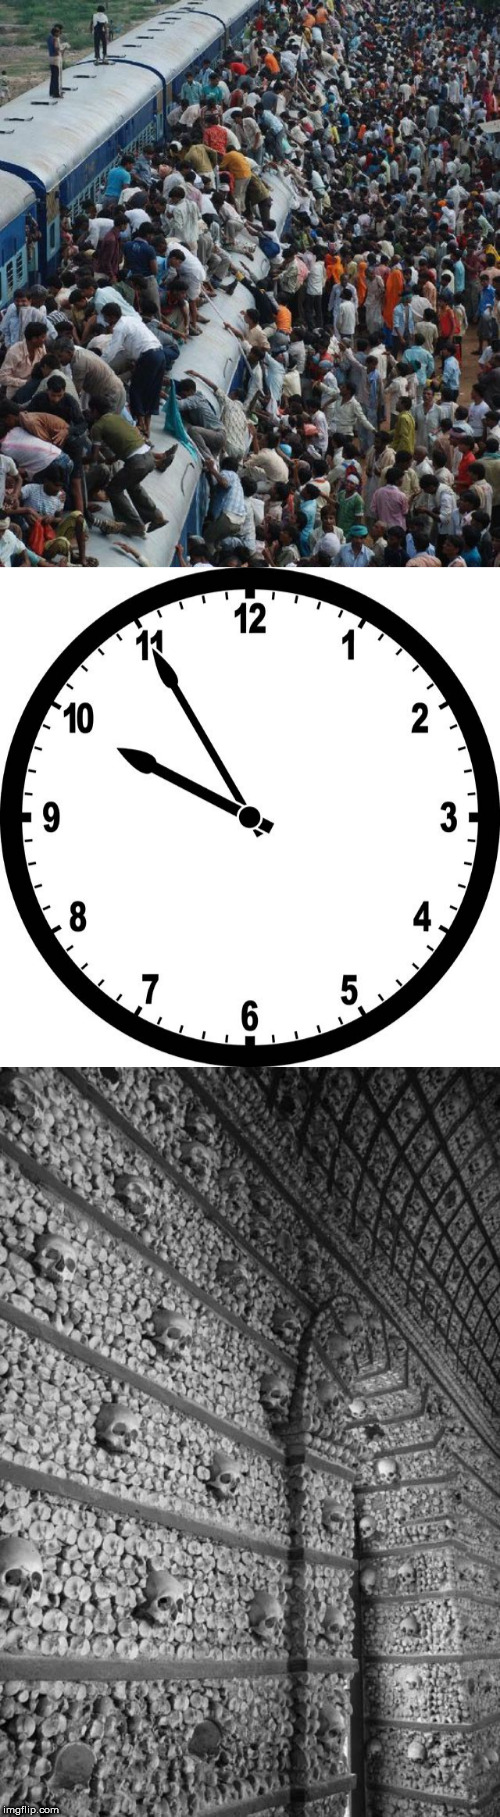 image tagged in clock,mobs | made w/ Imgflip meme maker